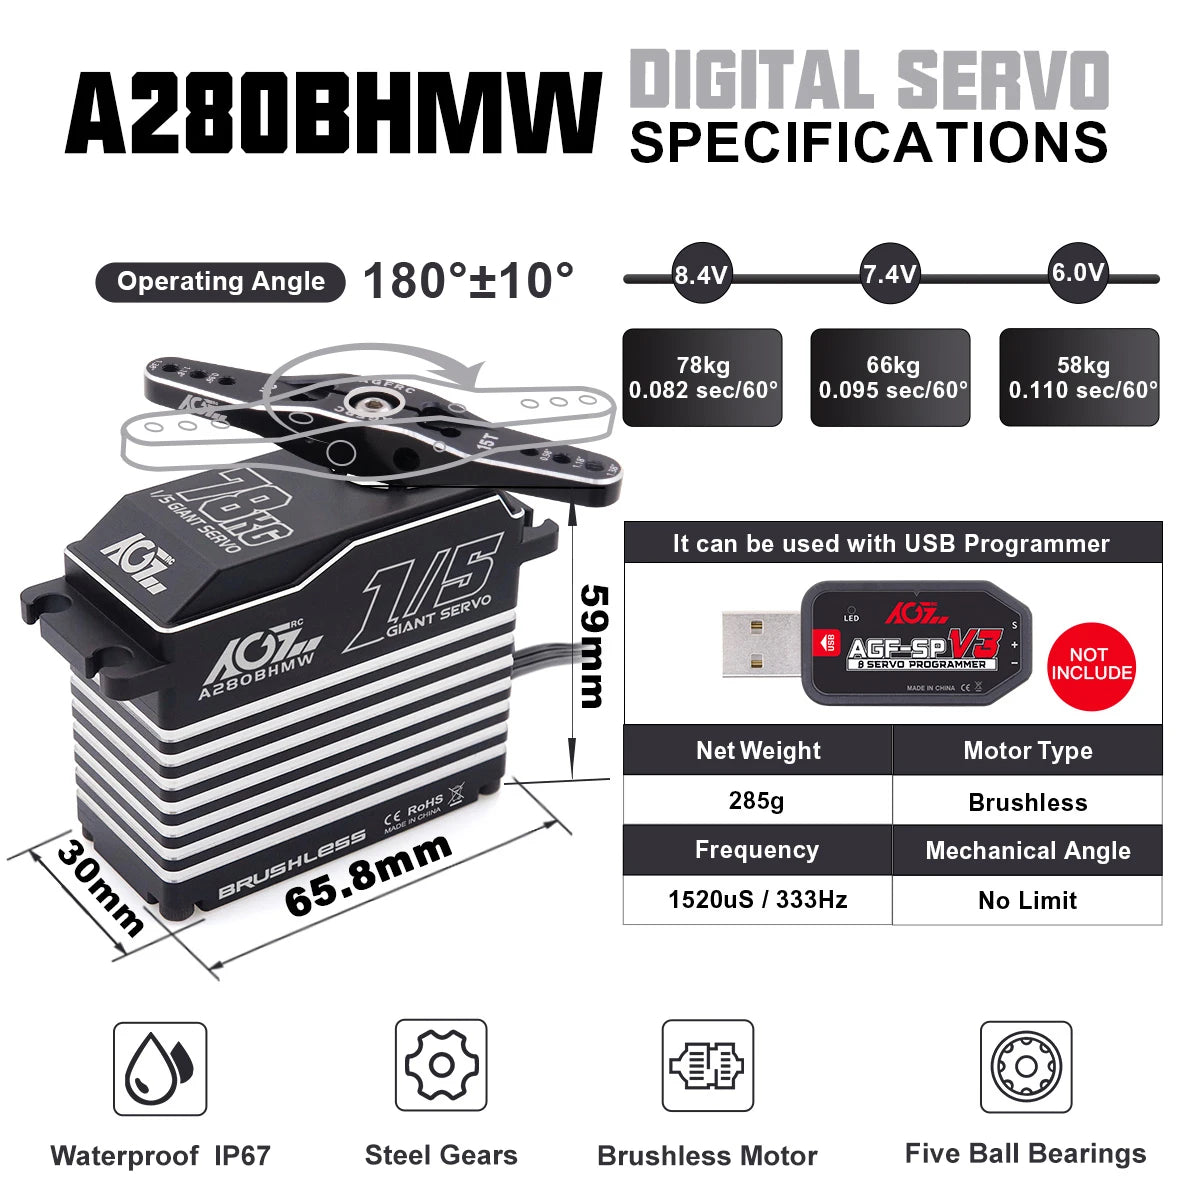 AGFRC A280BHMW , AZBBHMW SPECIFICATIONS Operating Angle 1809+108 8.4